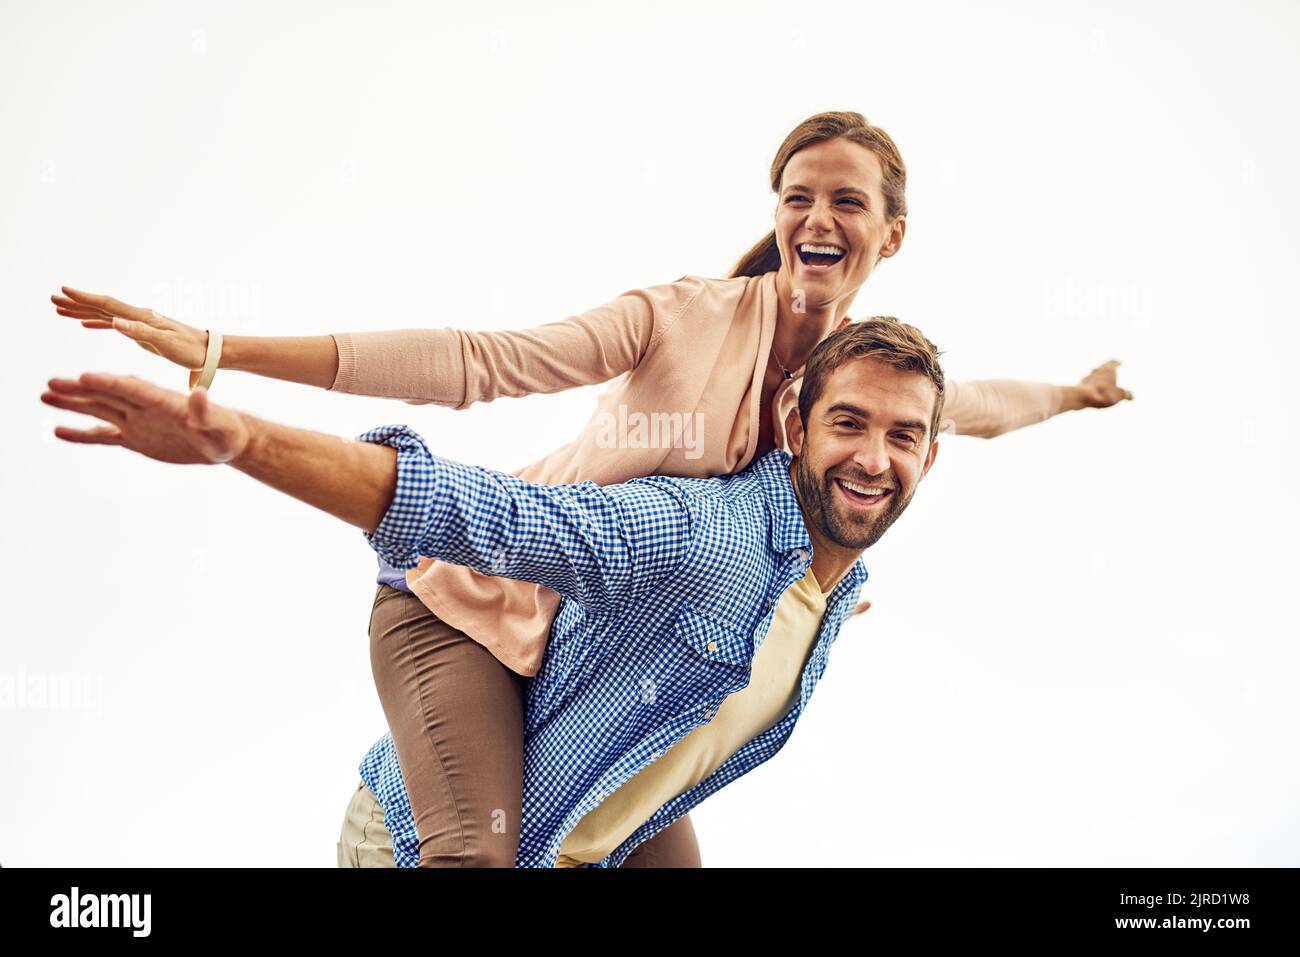 Enjoying our freedom. a man piggybacking his girlfriend while spending the day outdoors. Stock Photo